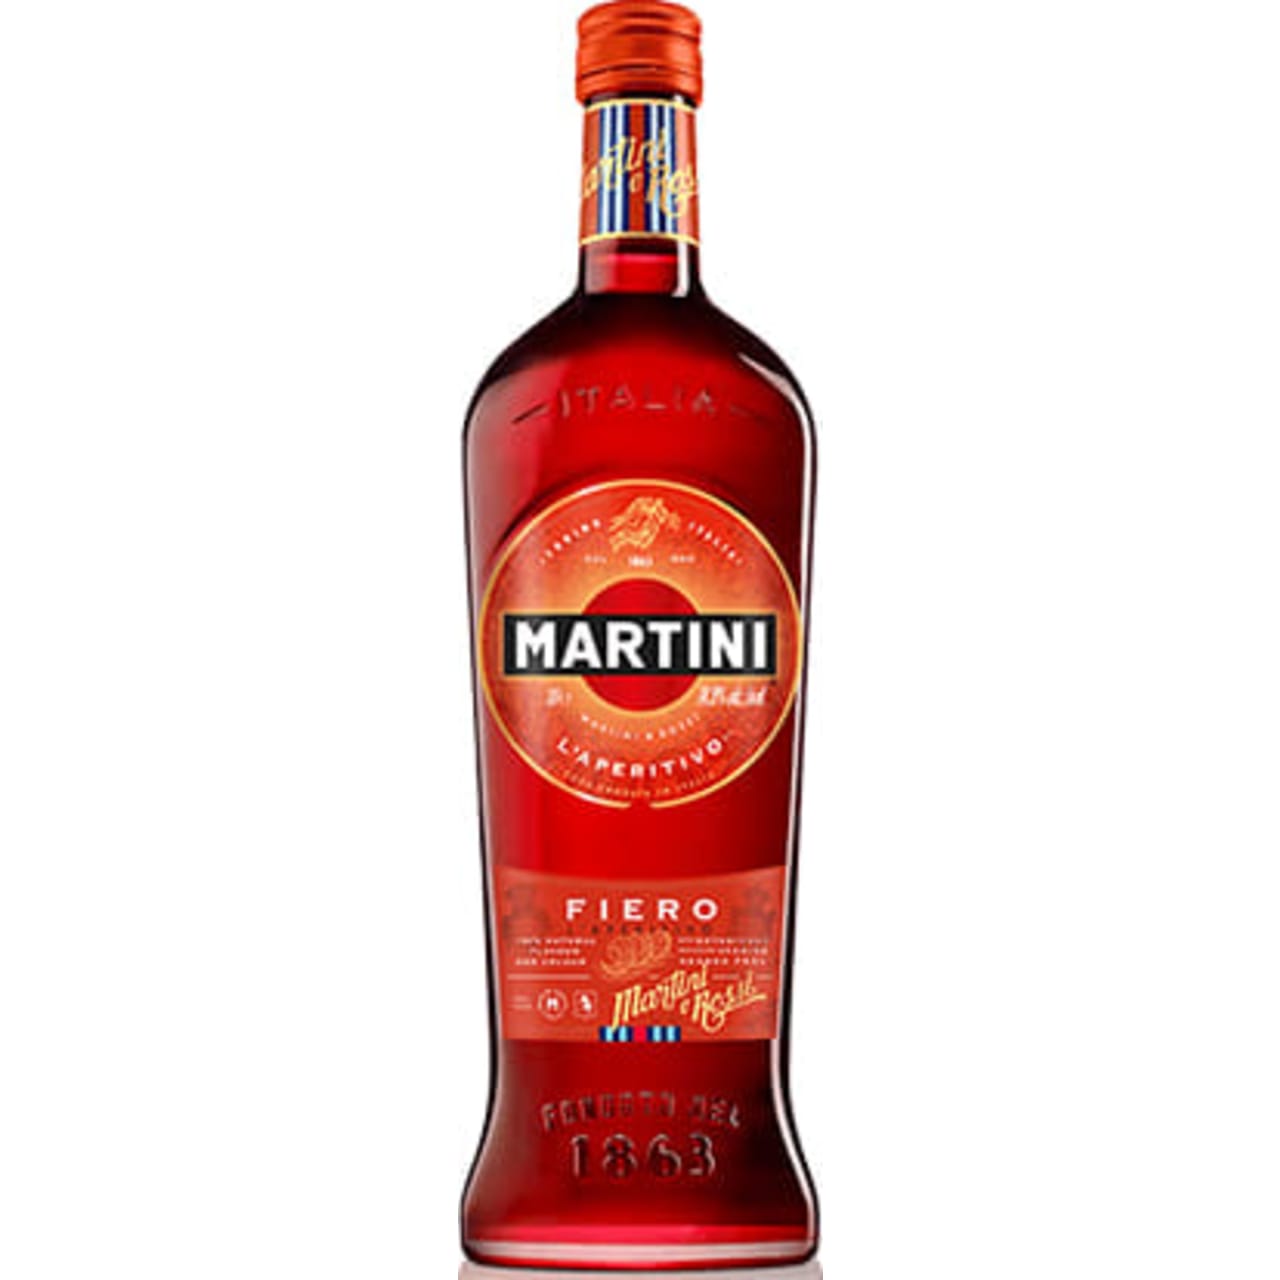 Thirst quenching, refreshing bitter sweet Vermouth from Martini. Displaying intense fruity citrus notes along with a strong fruity taste.